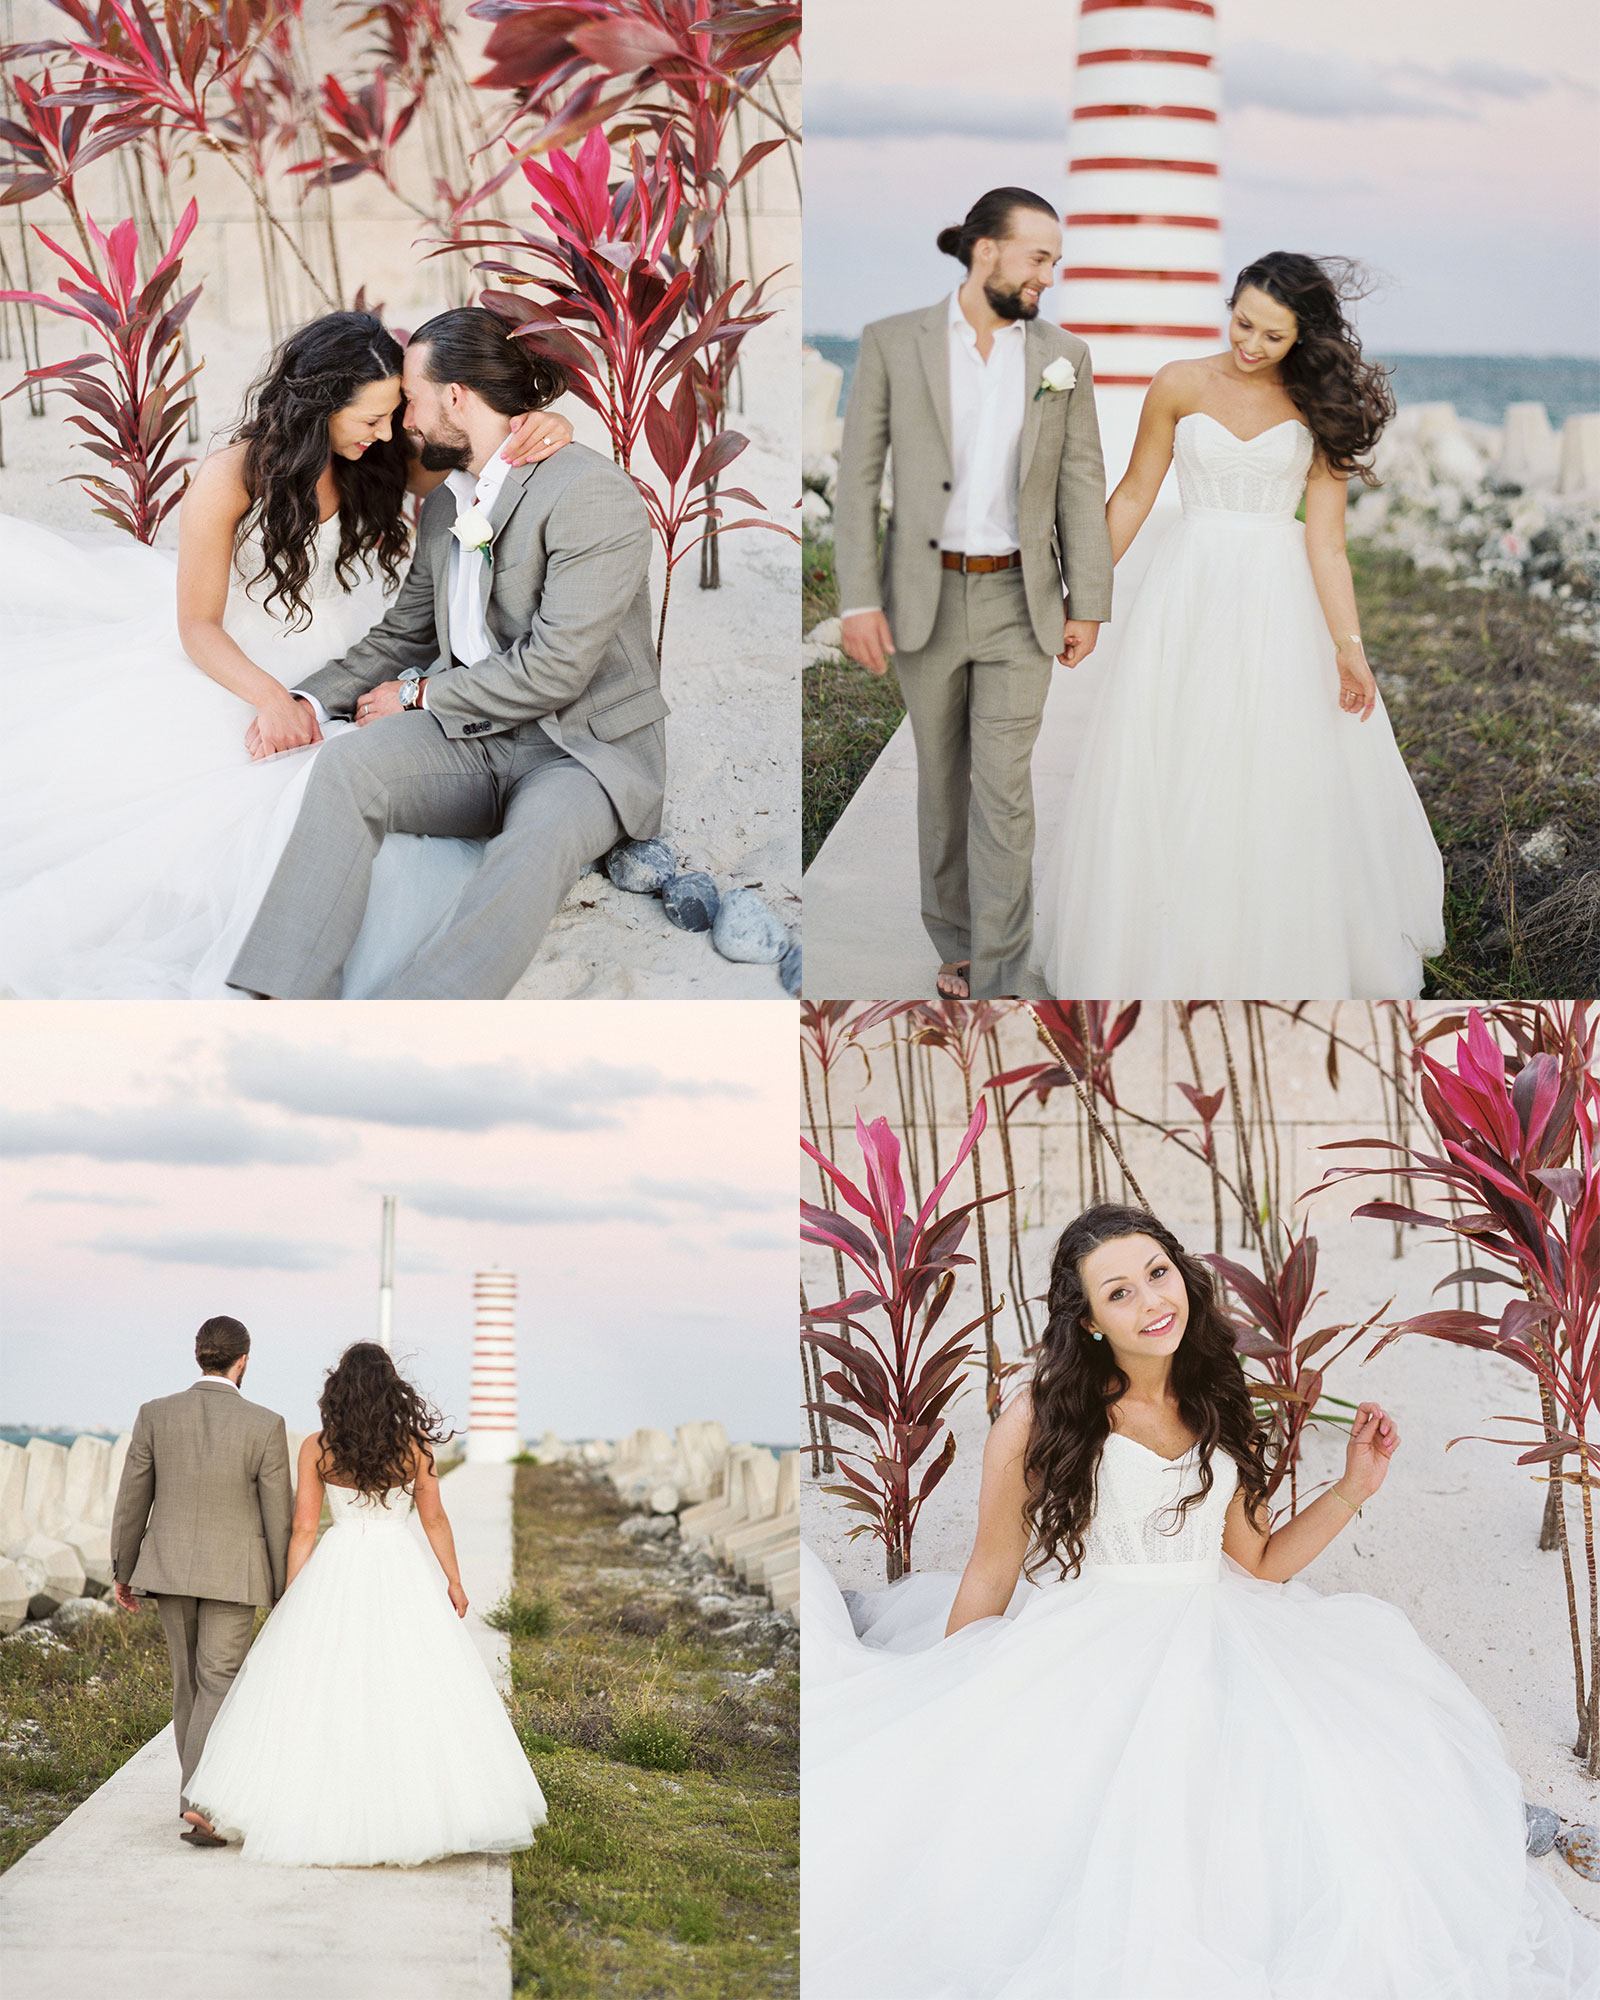 Bride & Groom in Mexico, destination wedding on the beach, Bridal separates, Watters Ashan skirt, Bride with hair down.